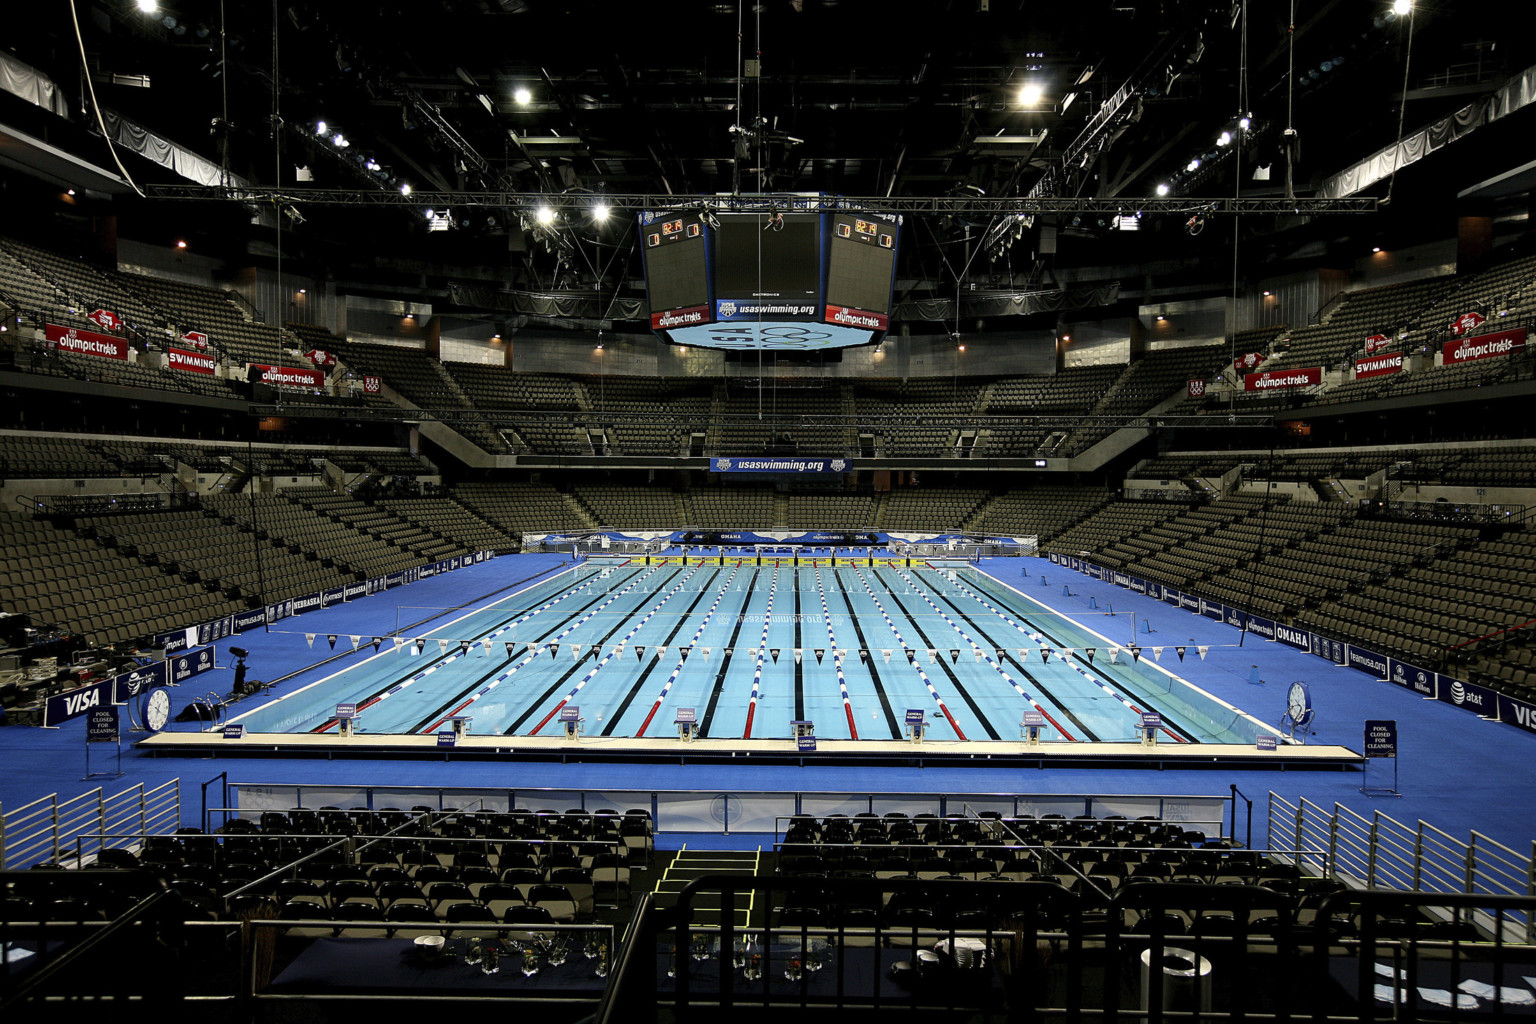 A temporary Olympic sized swimming pool set up within the empty arena. Jumbotron above has Olympic rings on bottom